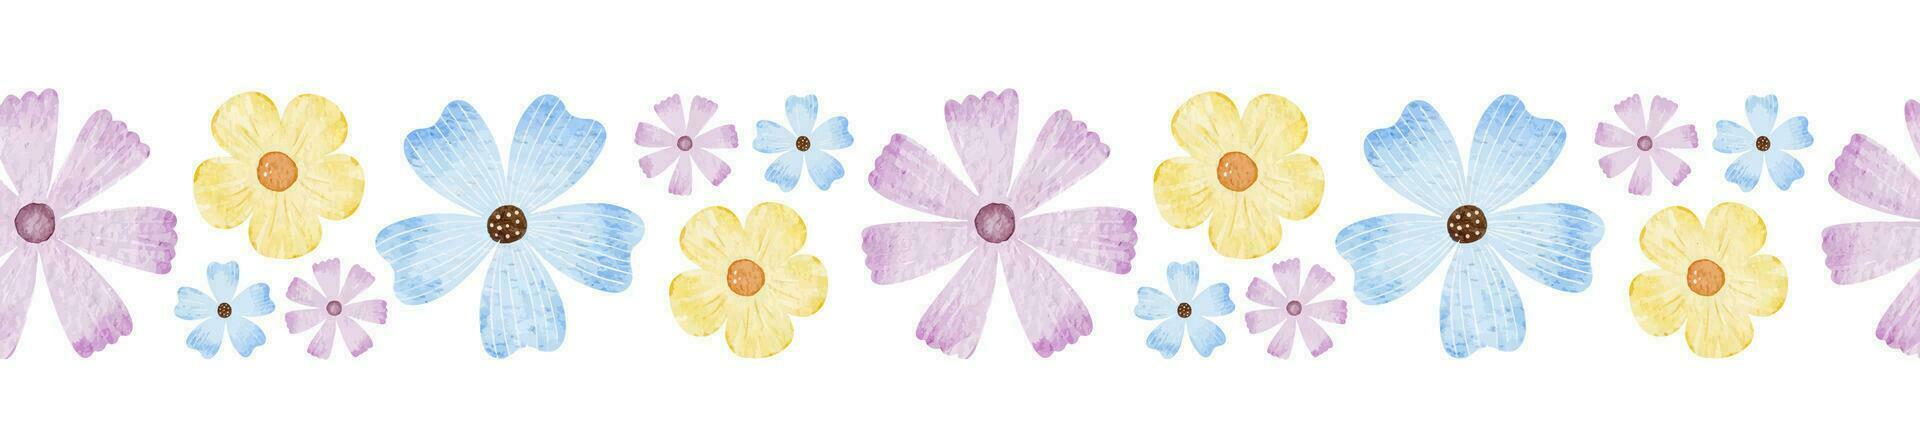 Blue, purple and yellow wildflowers. Seamless border of simple colors. Isolated watercolor illustration. For the design of postcards, packaging of goods, invitations, cards vector